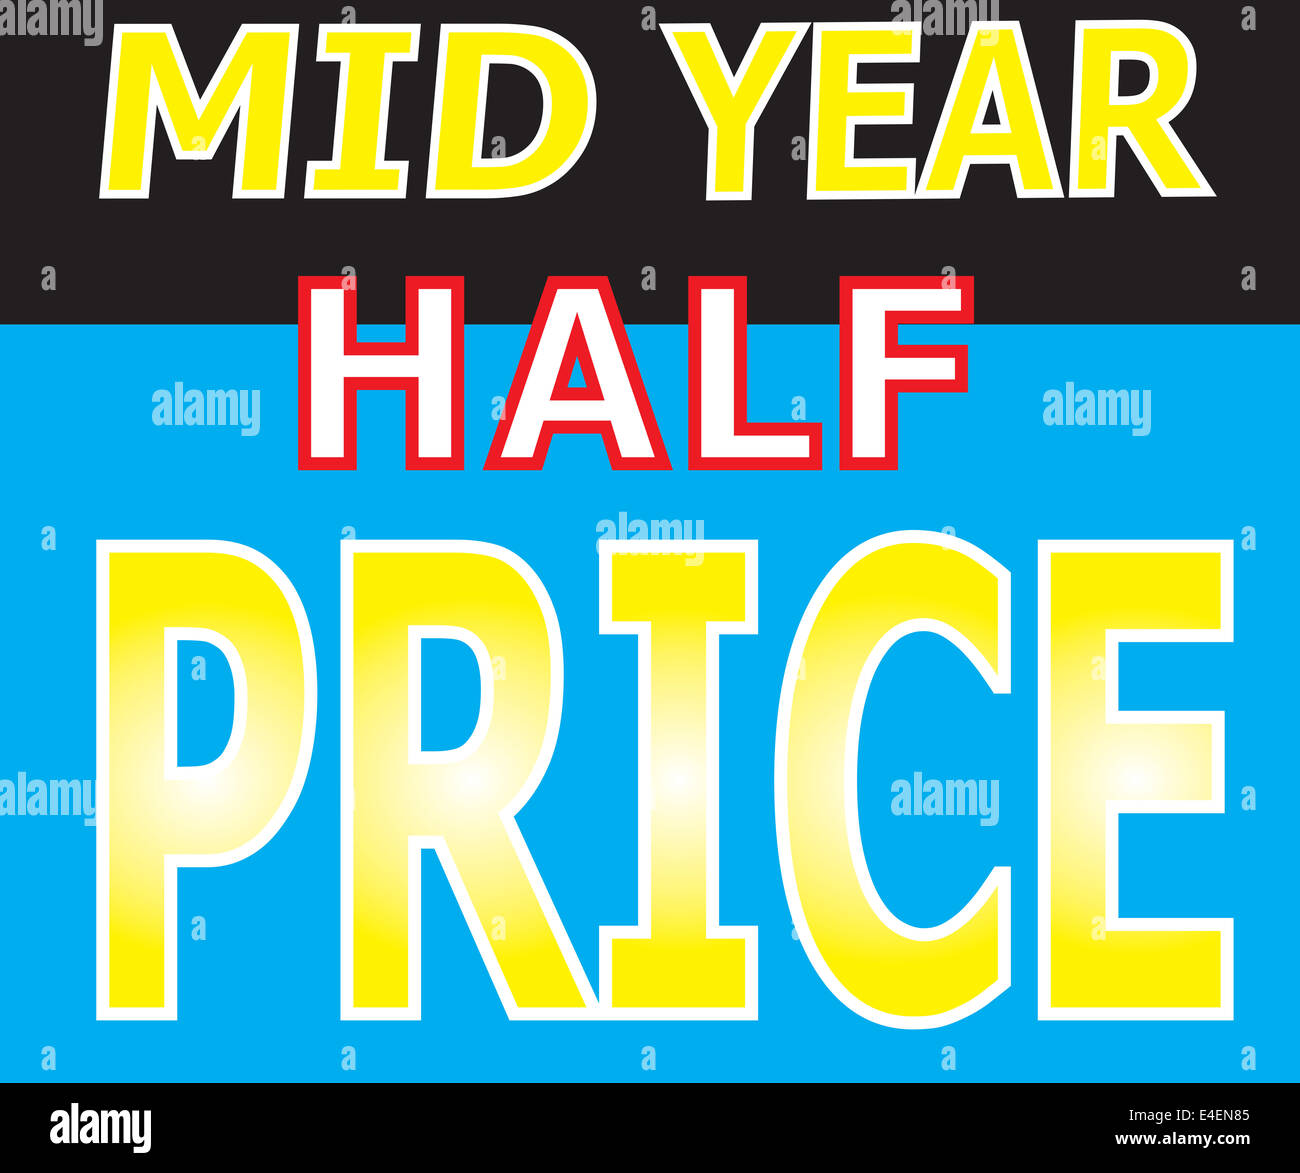 Vector of Mid Year Half Price Promotion Label. Stock Photo